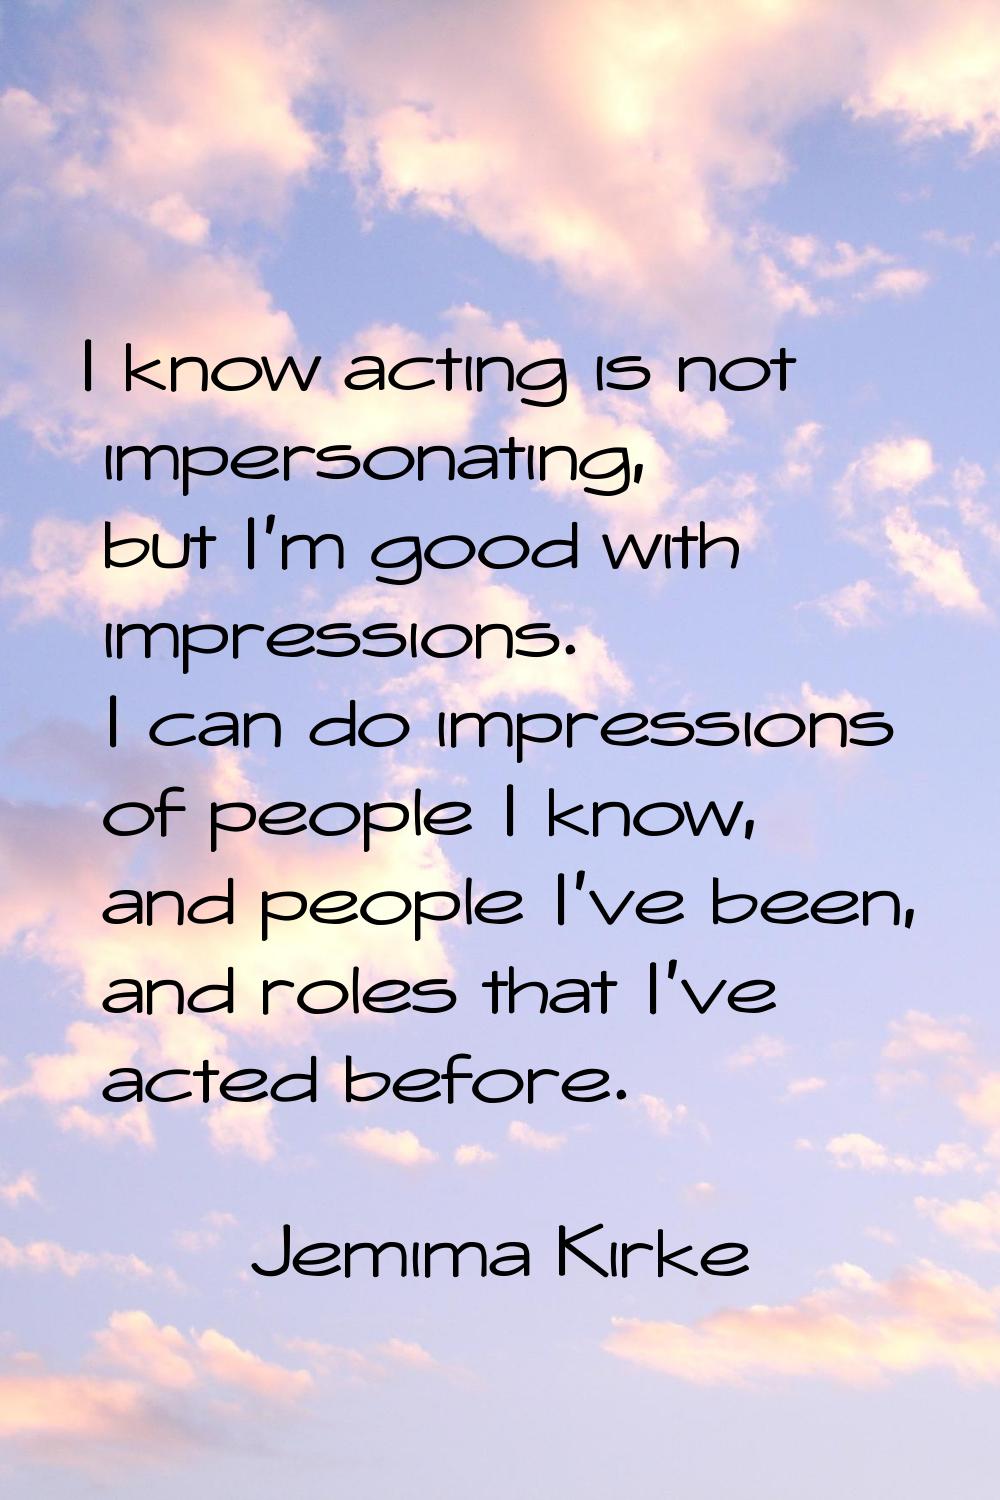 I know acting is not impersonating, but I'm good with impressions. I can do impressions of people I